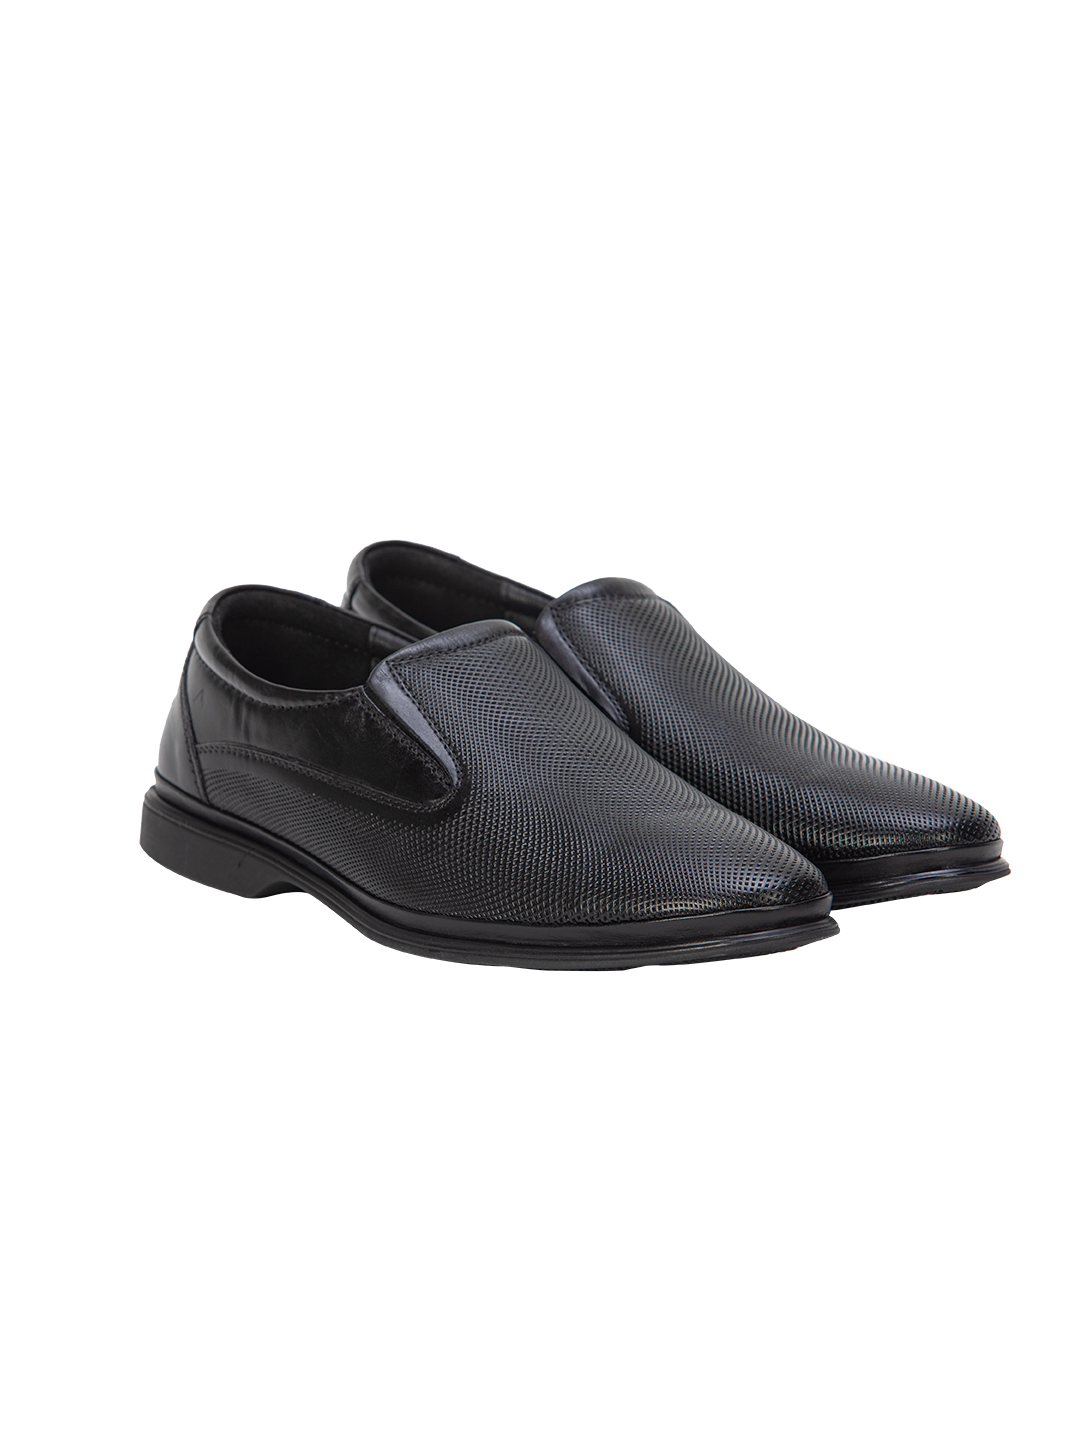 Buy Von Wellx Germany Comfort Mondaine Casual Black Shoes Online in Allahabad